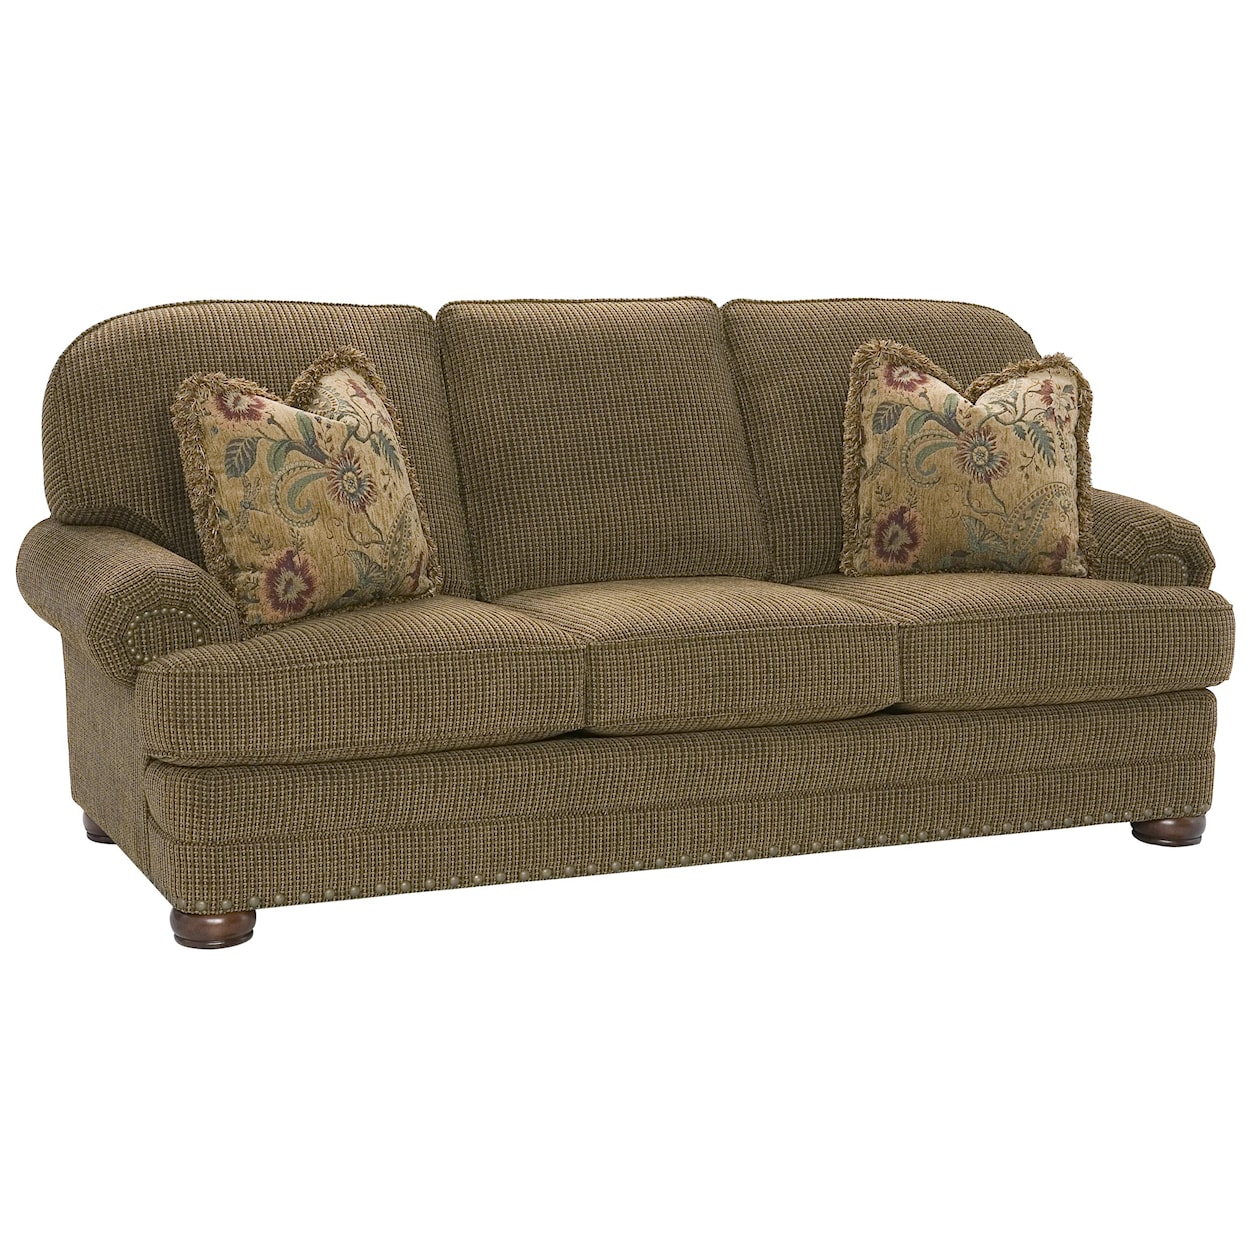 King Hickory Edward High Class Sofa with Casual Charm